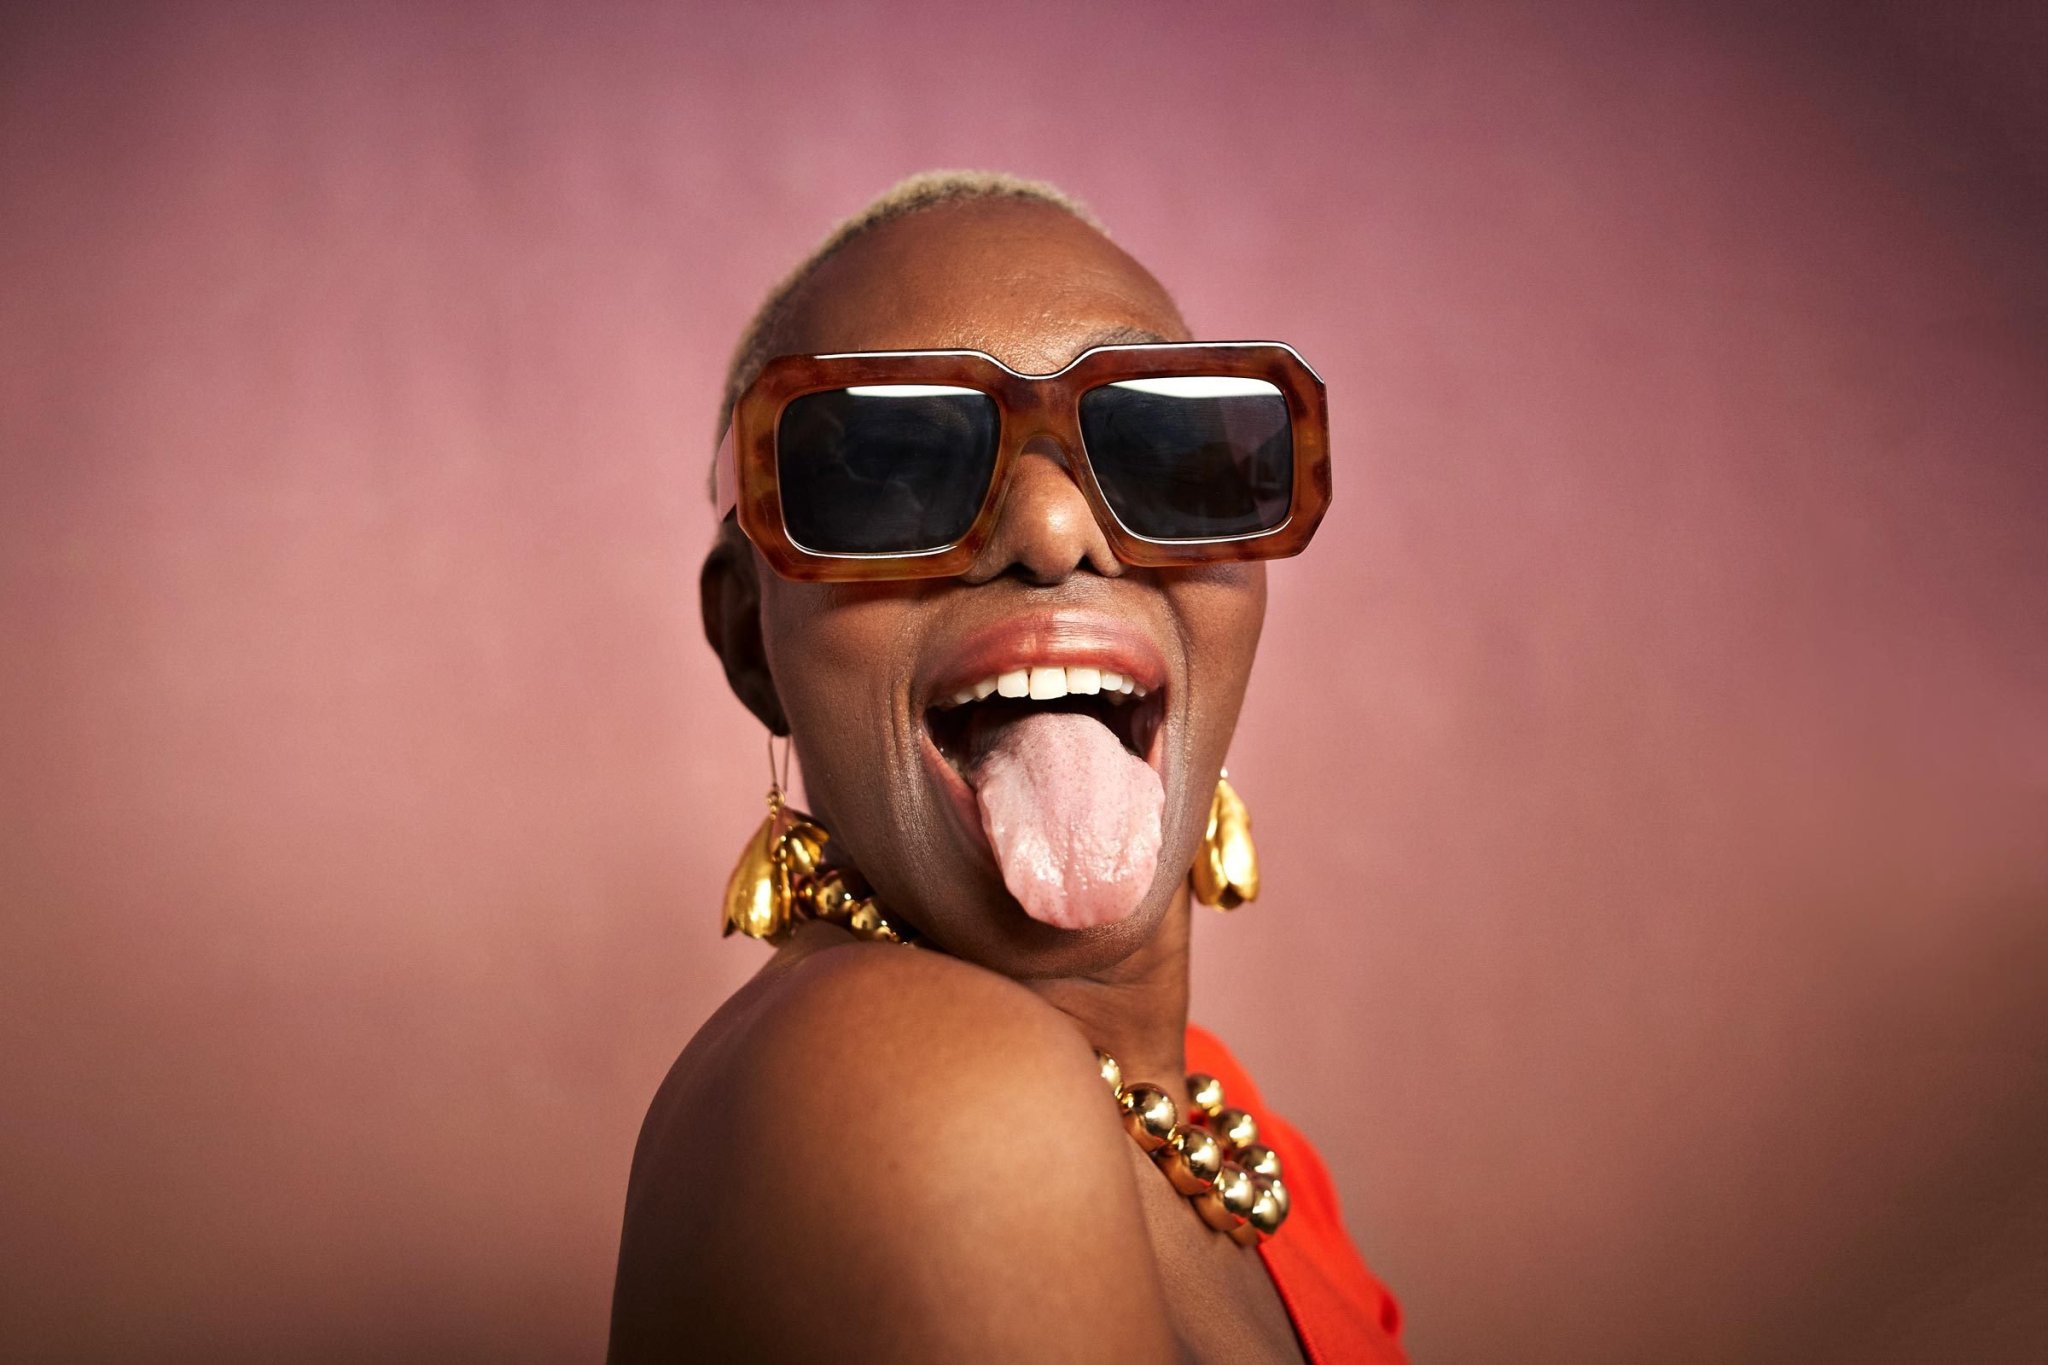 White Spots on Your Tongue? Here’s What They Could Mean for Your Health